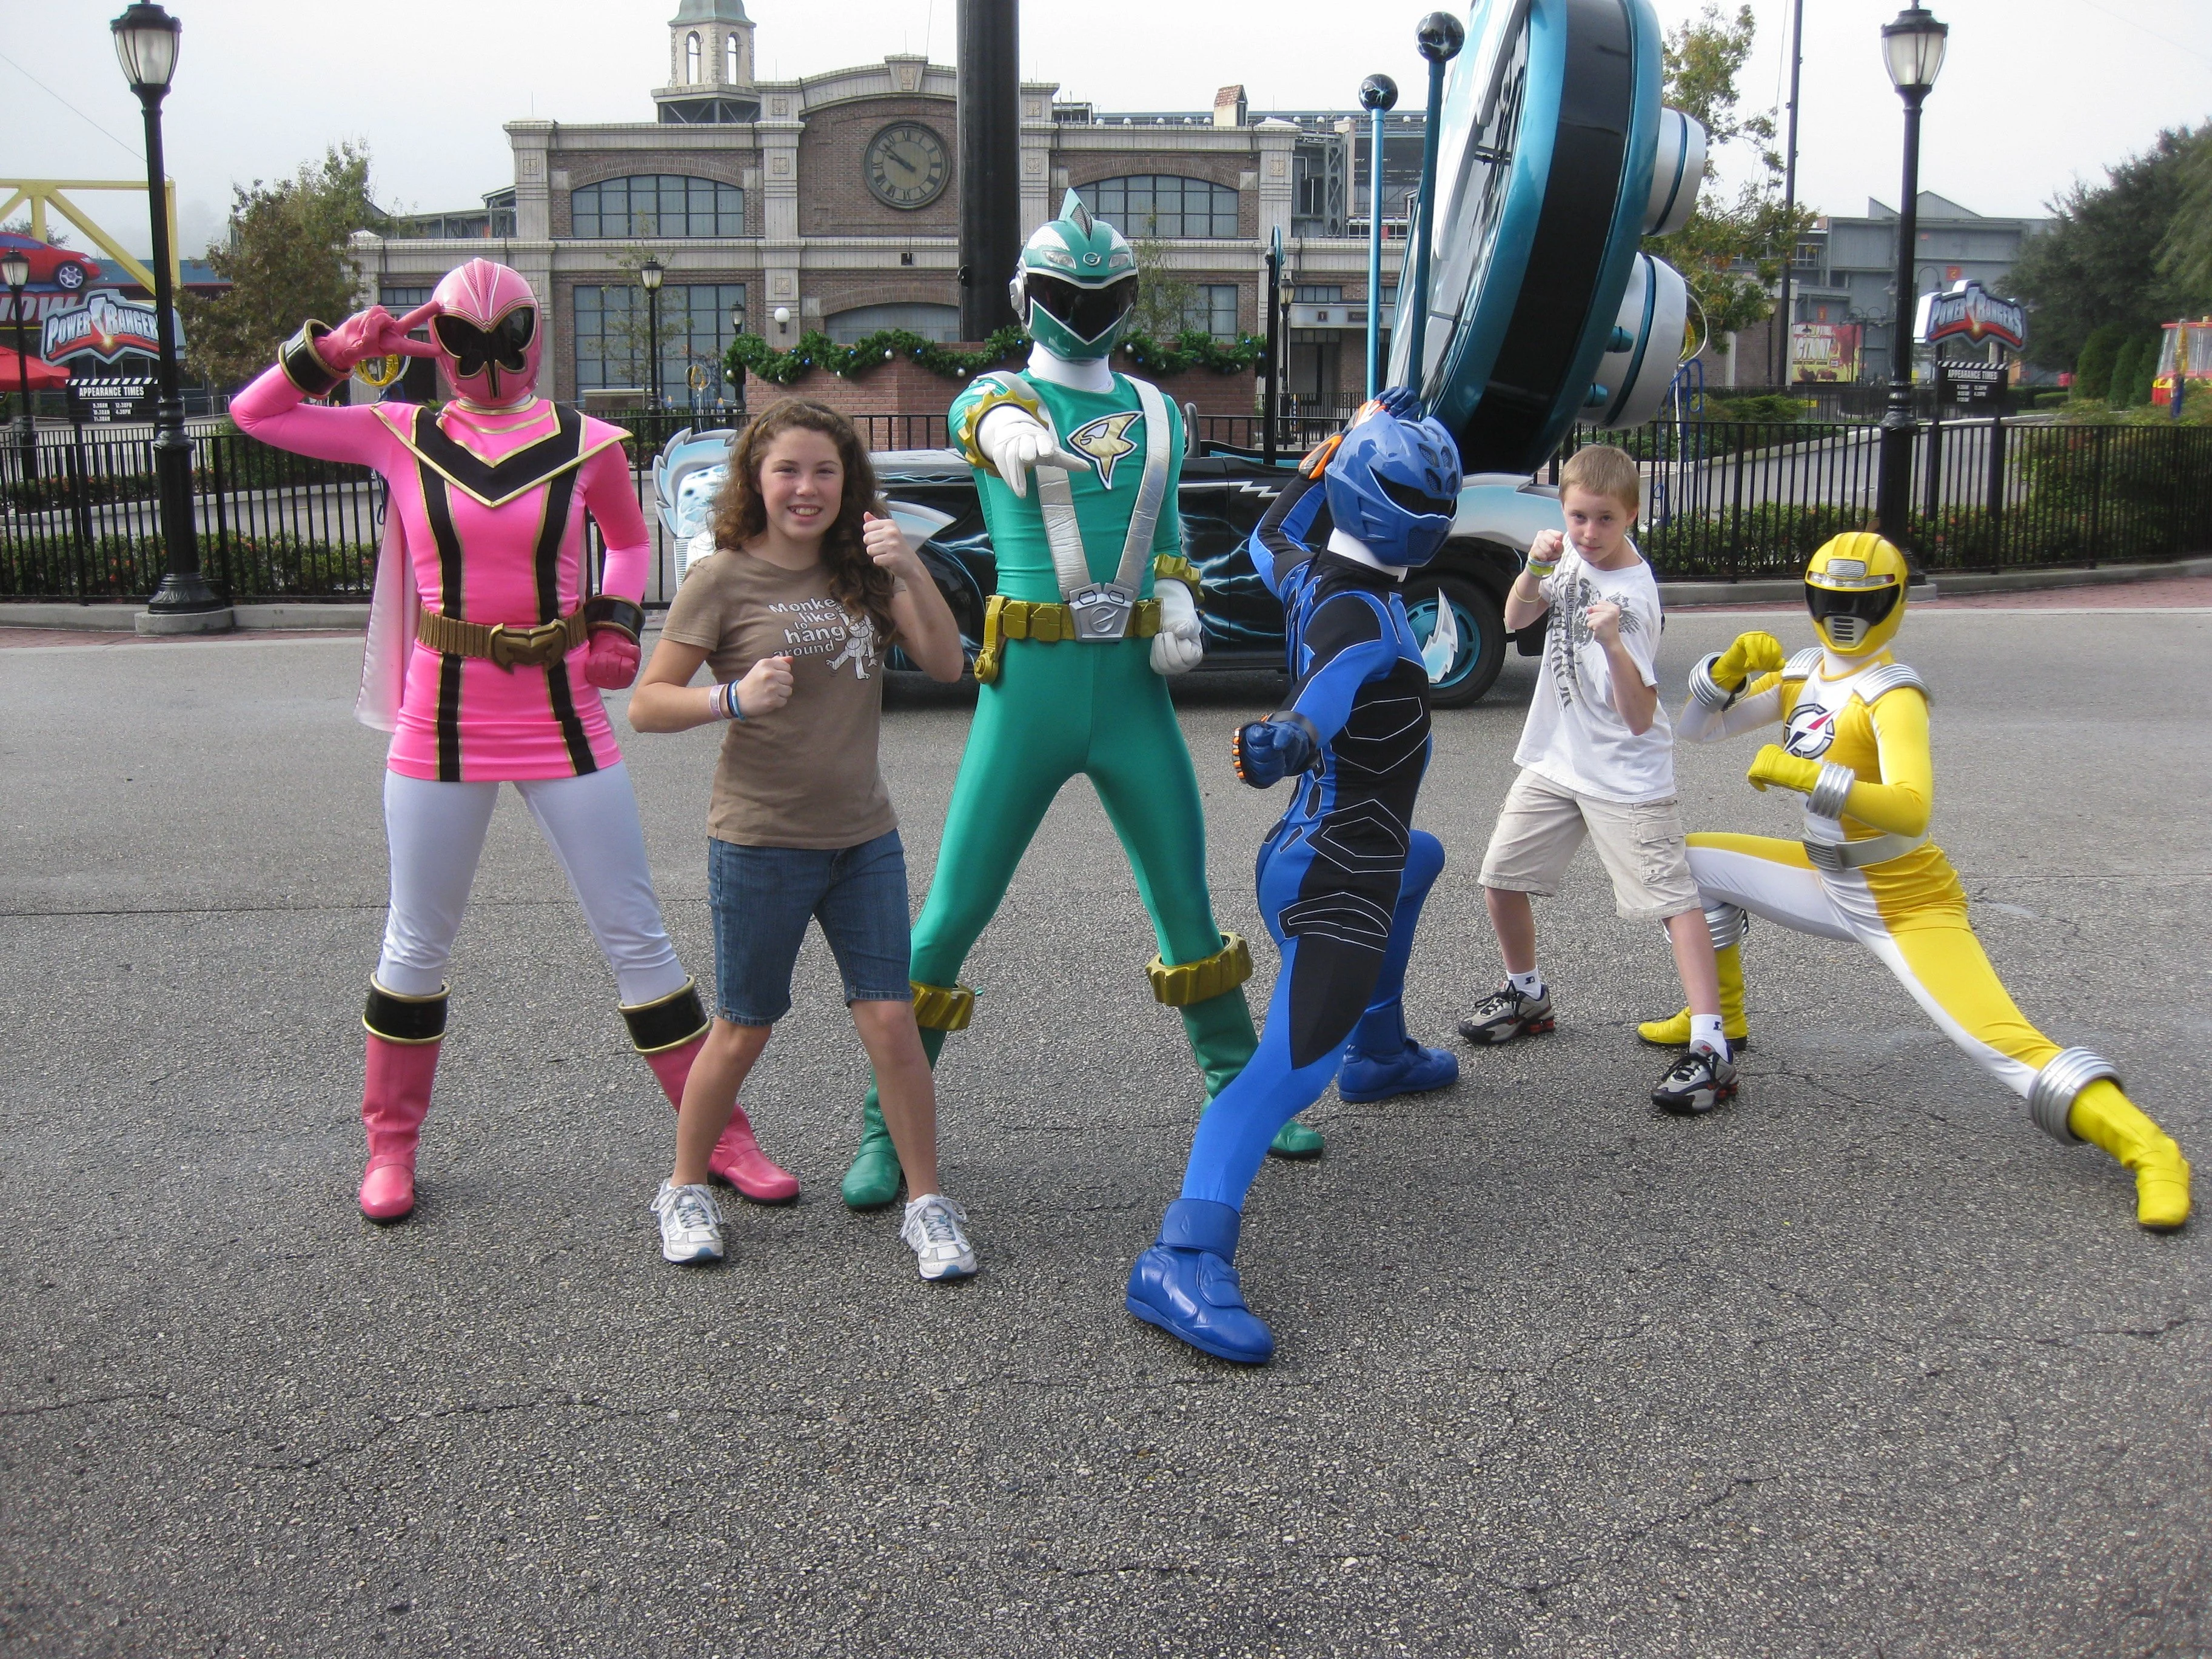 The Power Rangers were my older two children's favorite meet in WDW.  They loved doing the karate style posing with the Rangers before they were retired.  This photo was taken in 2009.